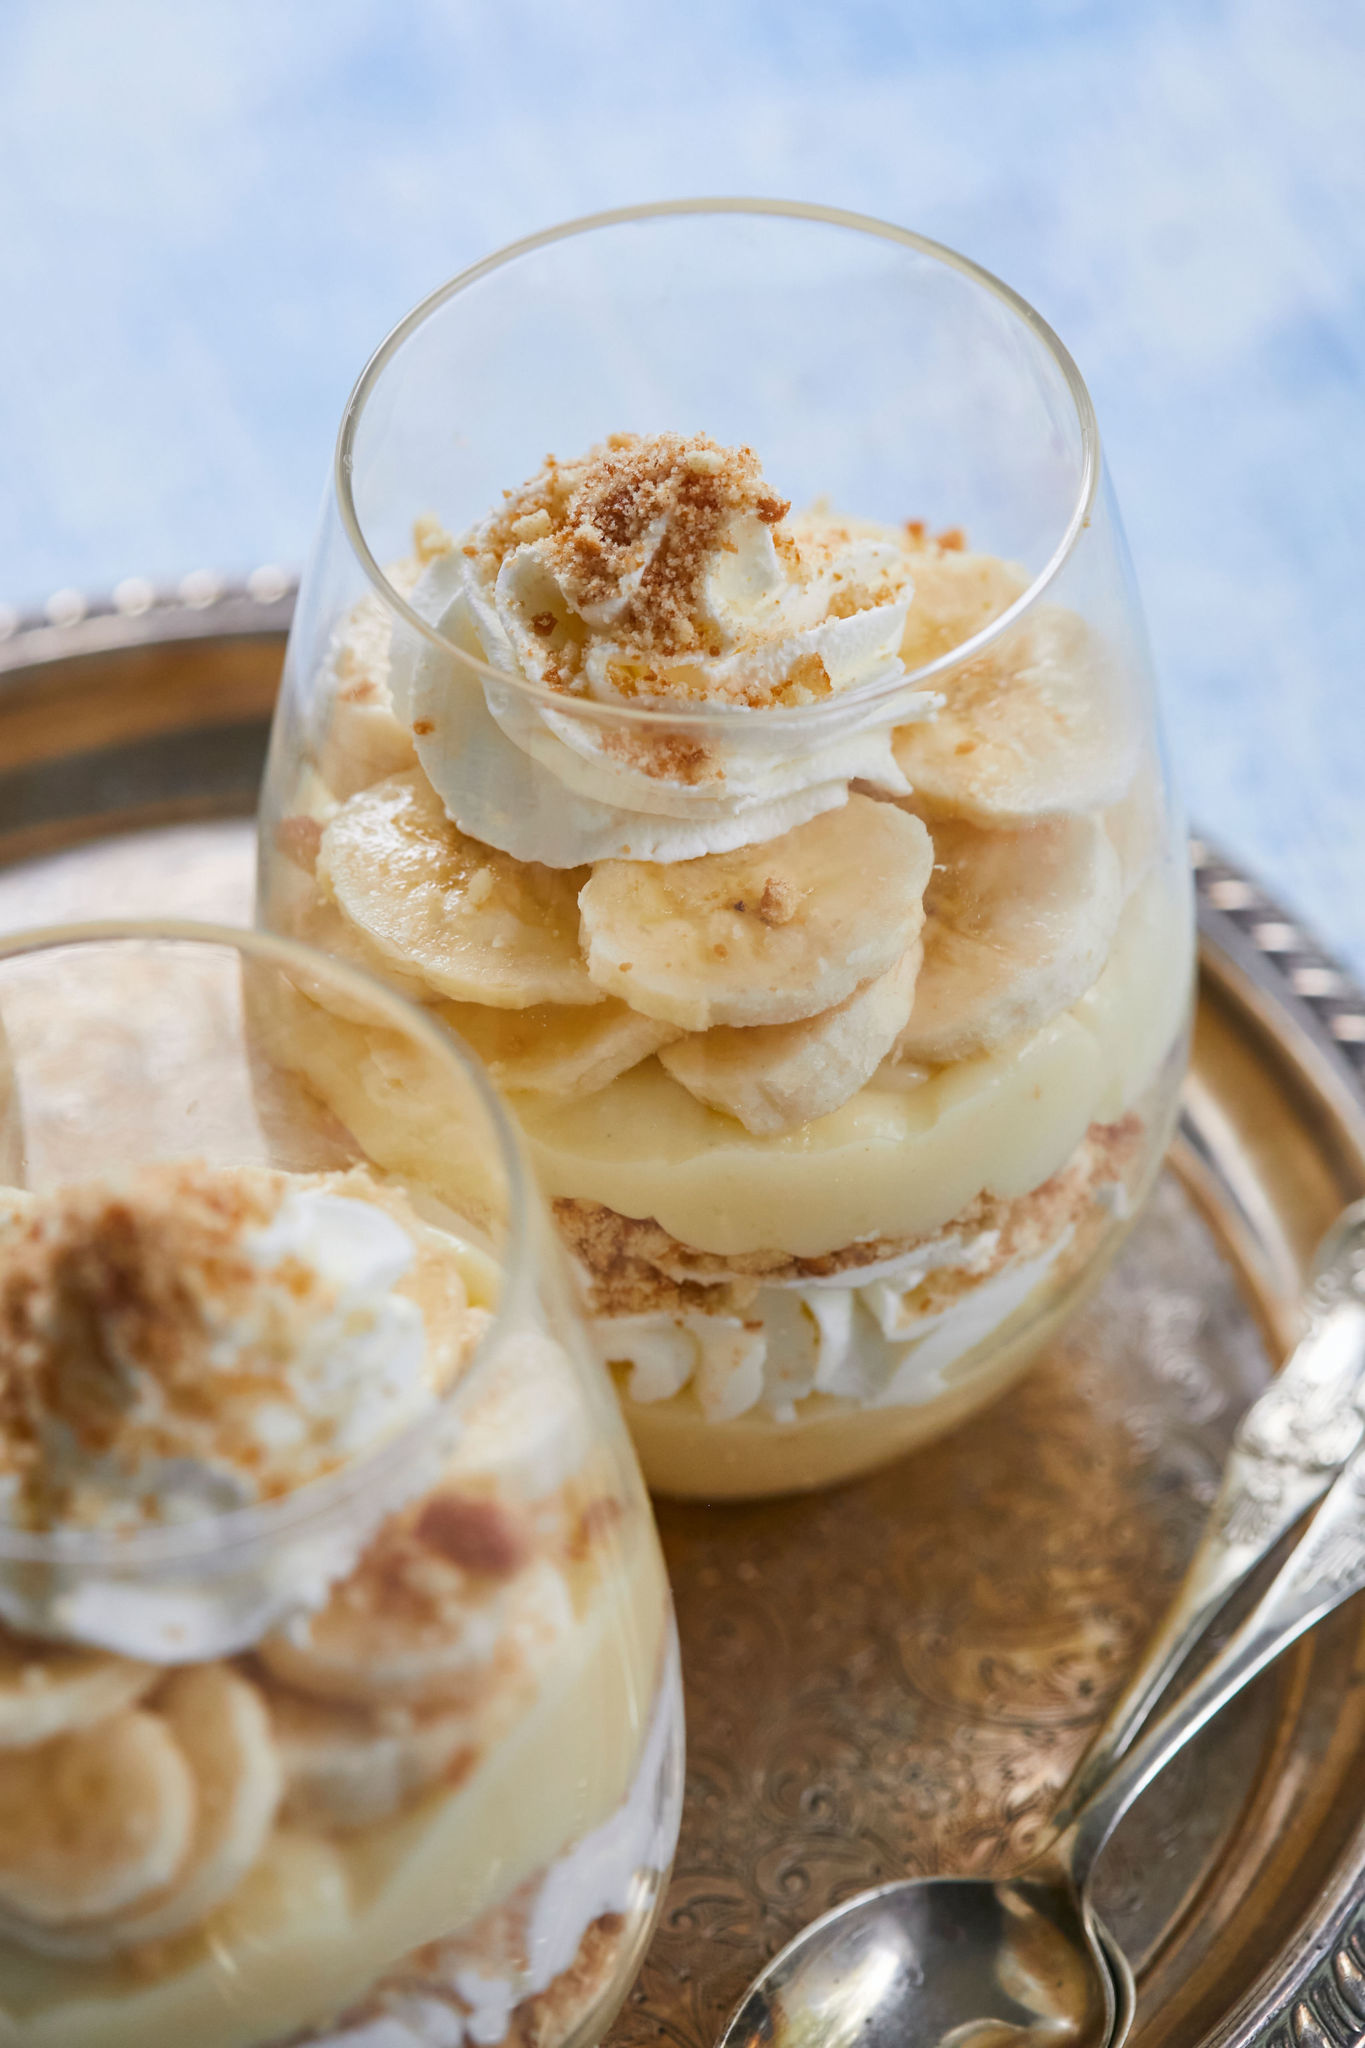 A close up of my Homemade Banana Pudding, showing the layers and the texture.